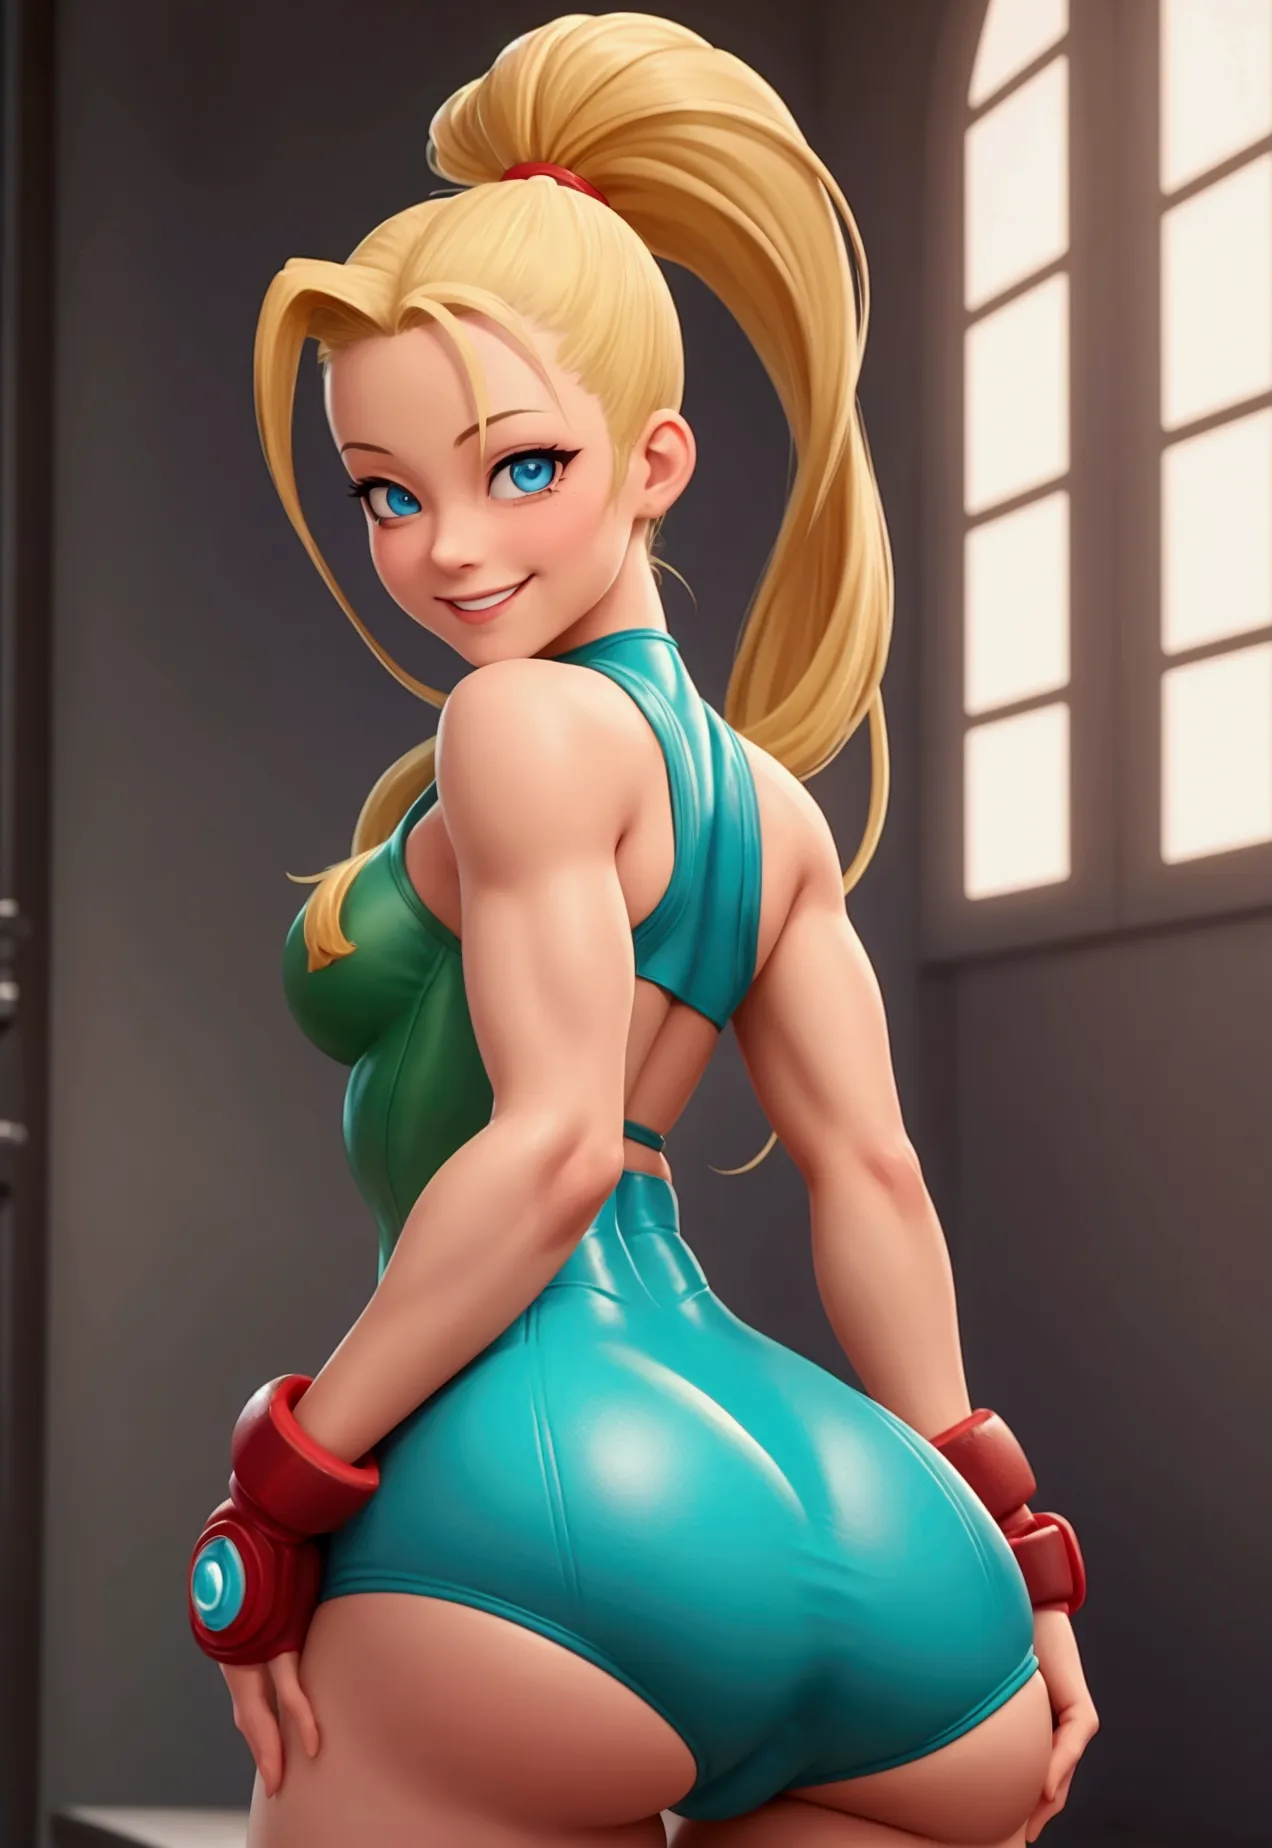 Beautiful Cammy from street fighter looking at camera very smiling in sexy pose showing her ass